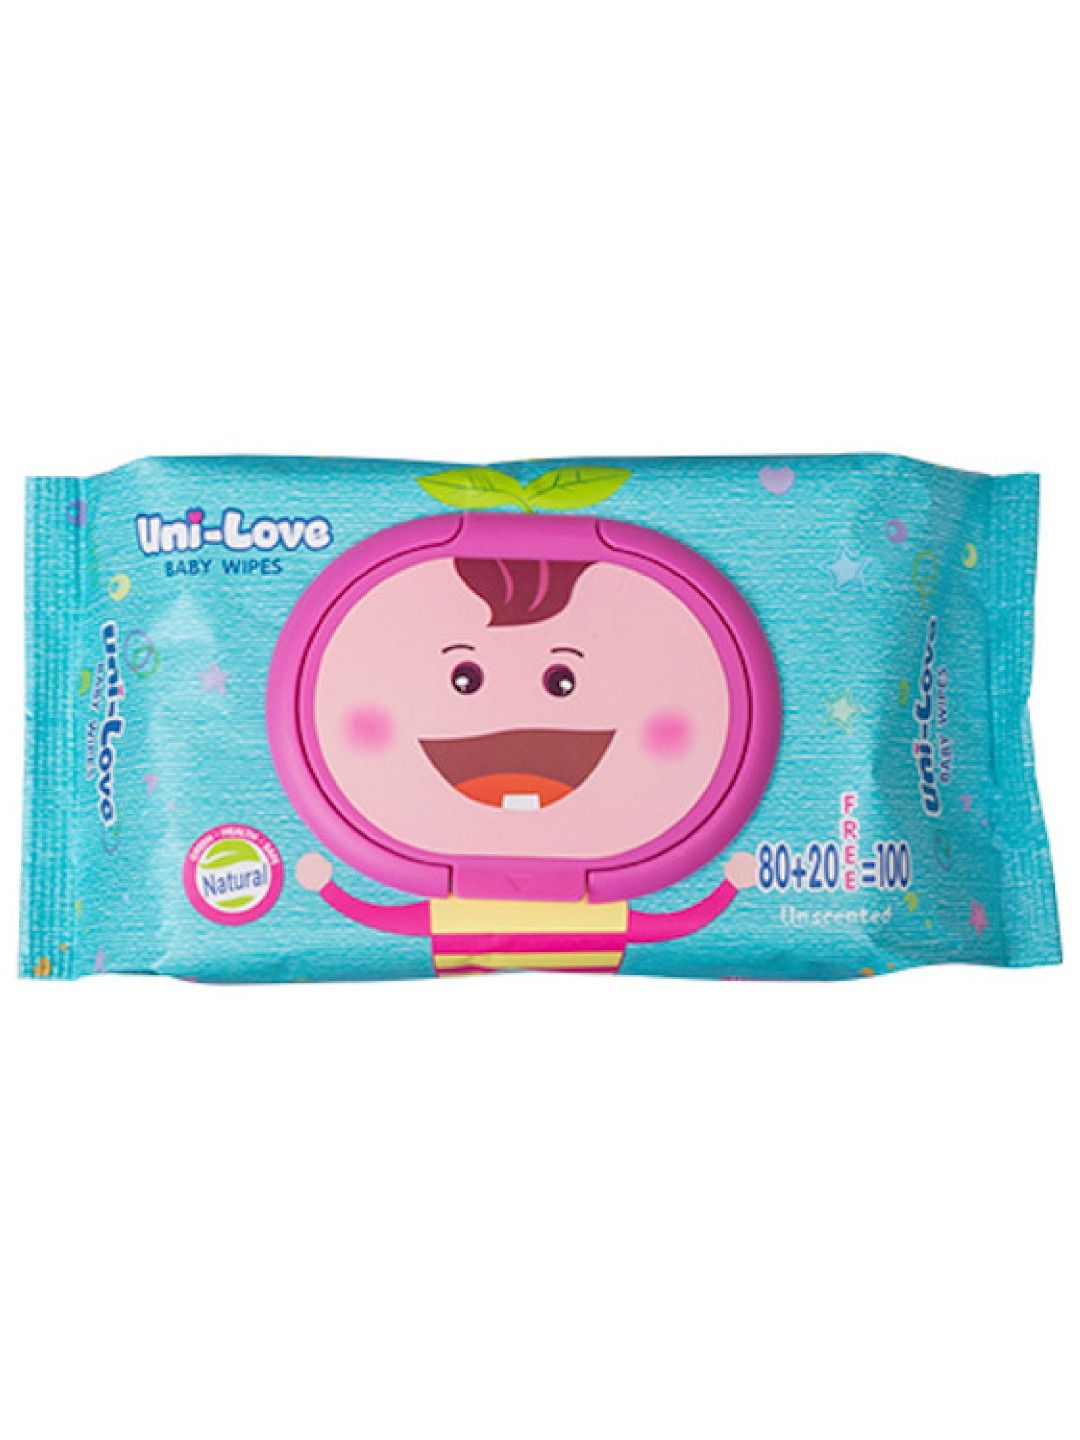 Uni-love Unscented Baby Wipes (100s)